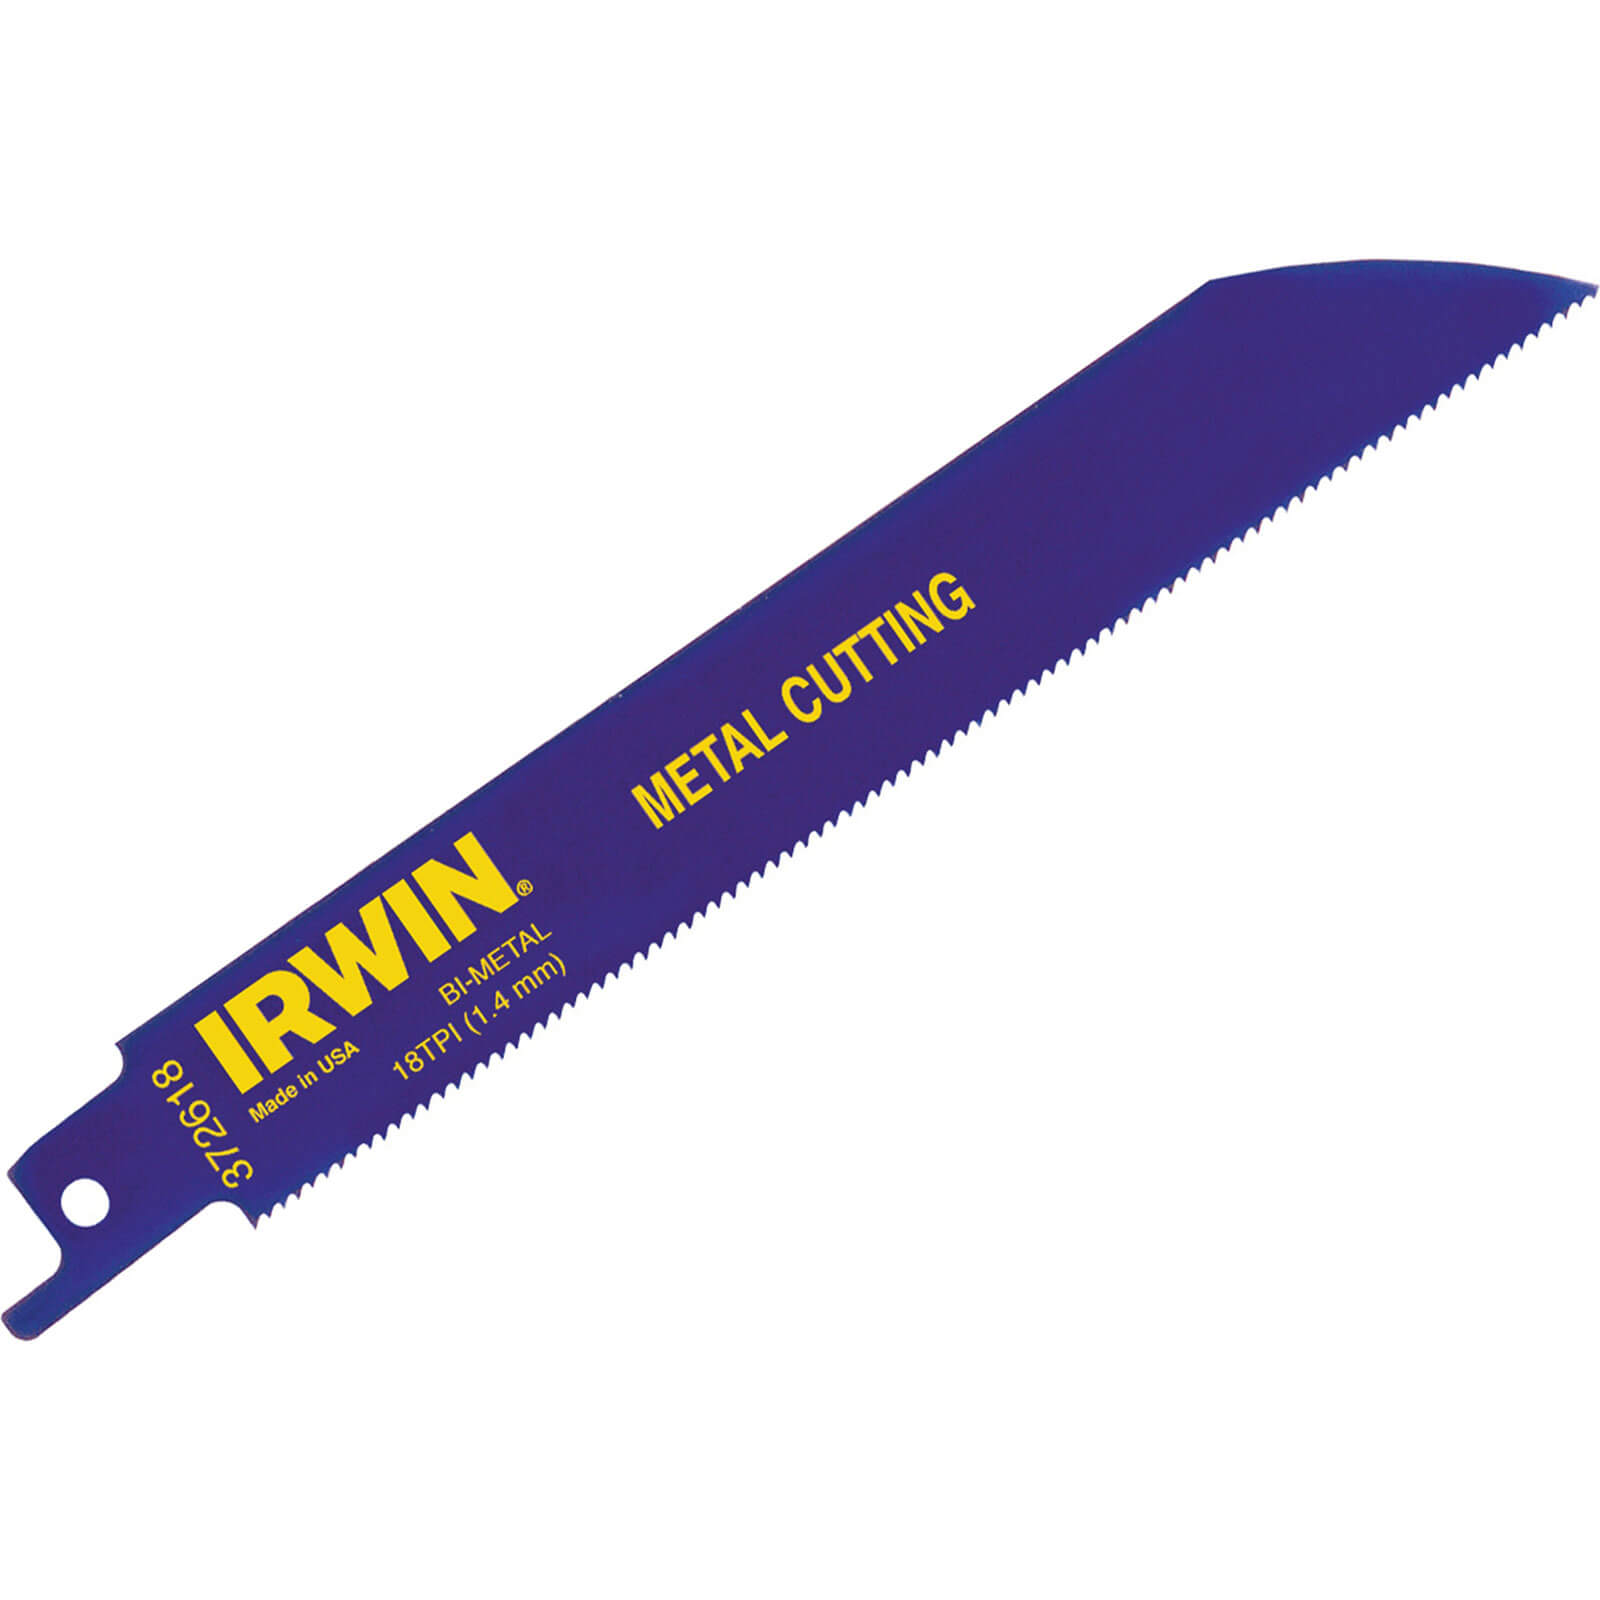 Photos - Power Tool Accessory IRWIN 614R Bi Metal Reciprocating Saw Blades for Metal 150mm Pack of 25 10 